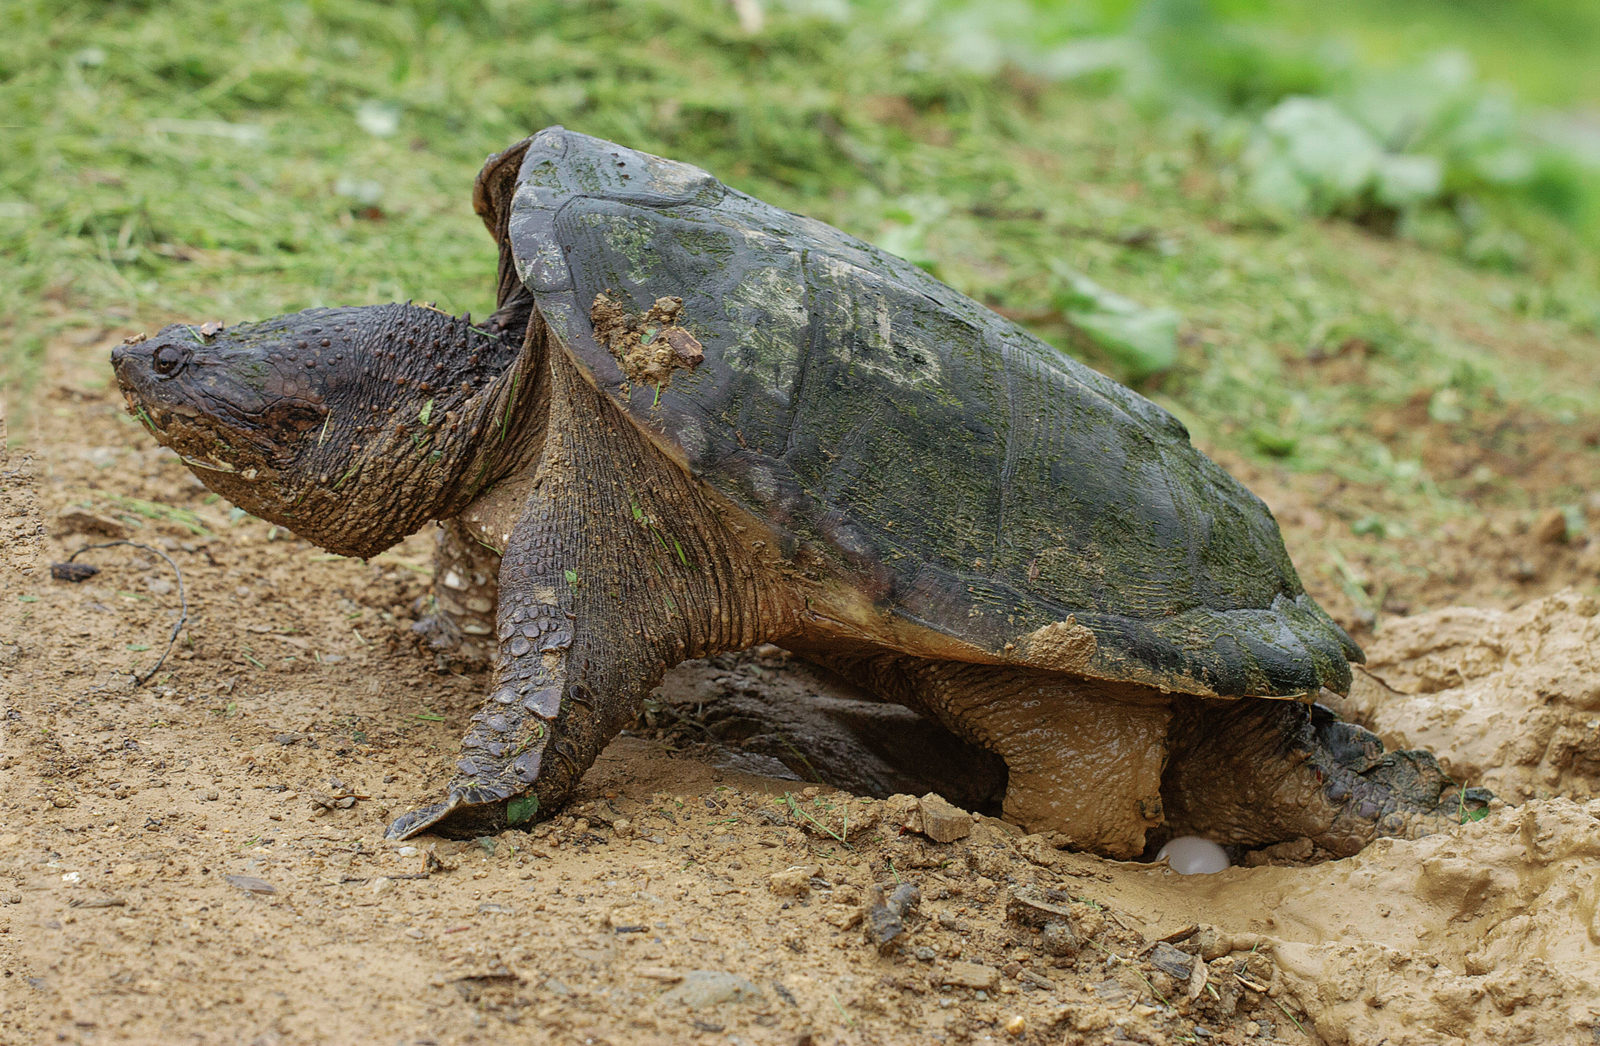 An image of a female snapping turtle laying her eggs in the ground; the females will lay between 25 and 55 eggs per clutch